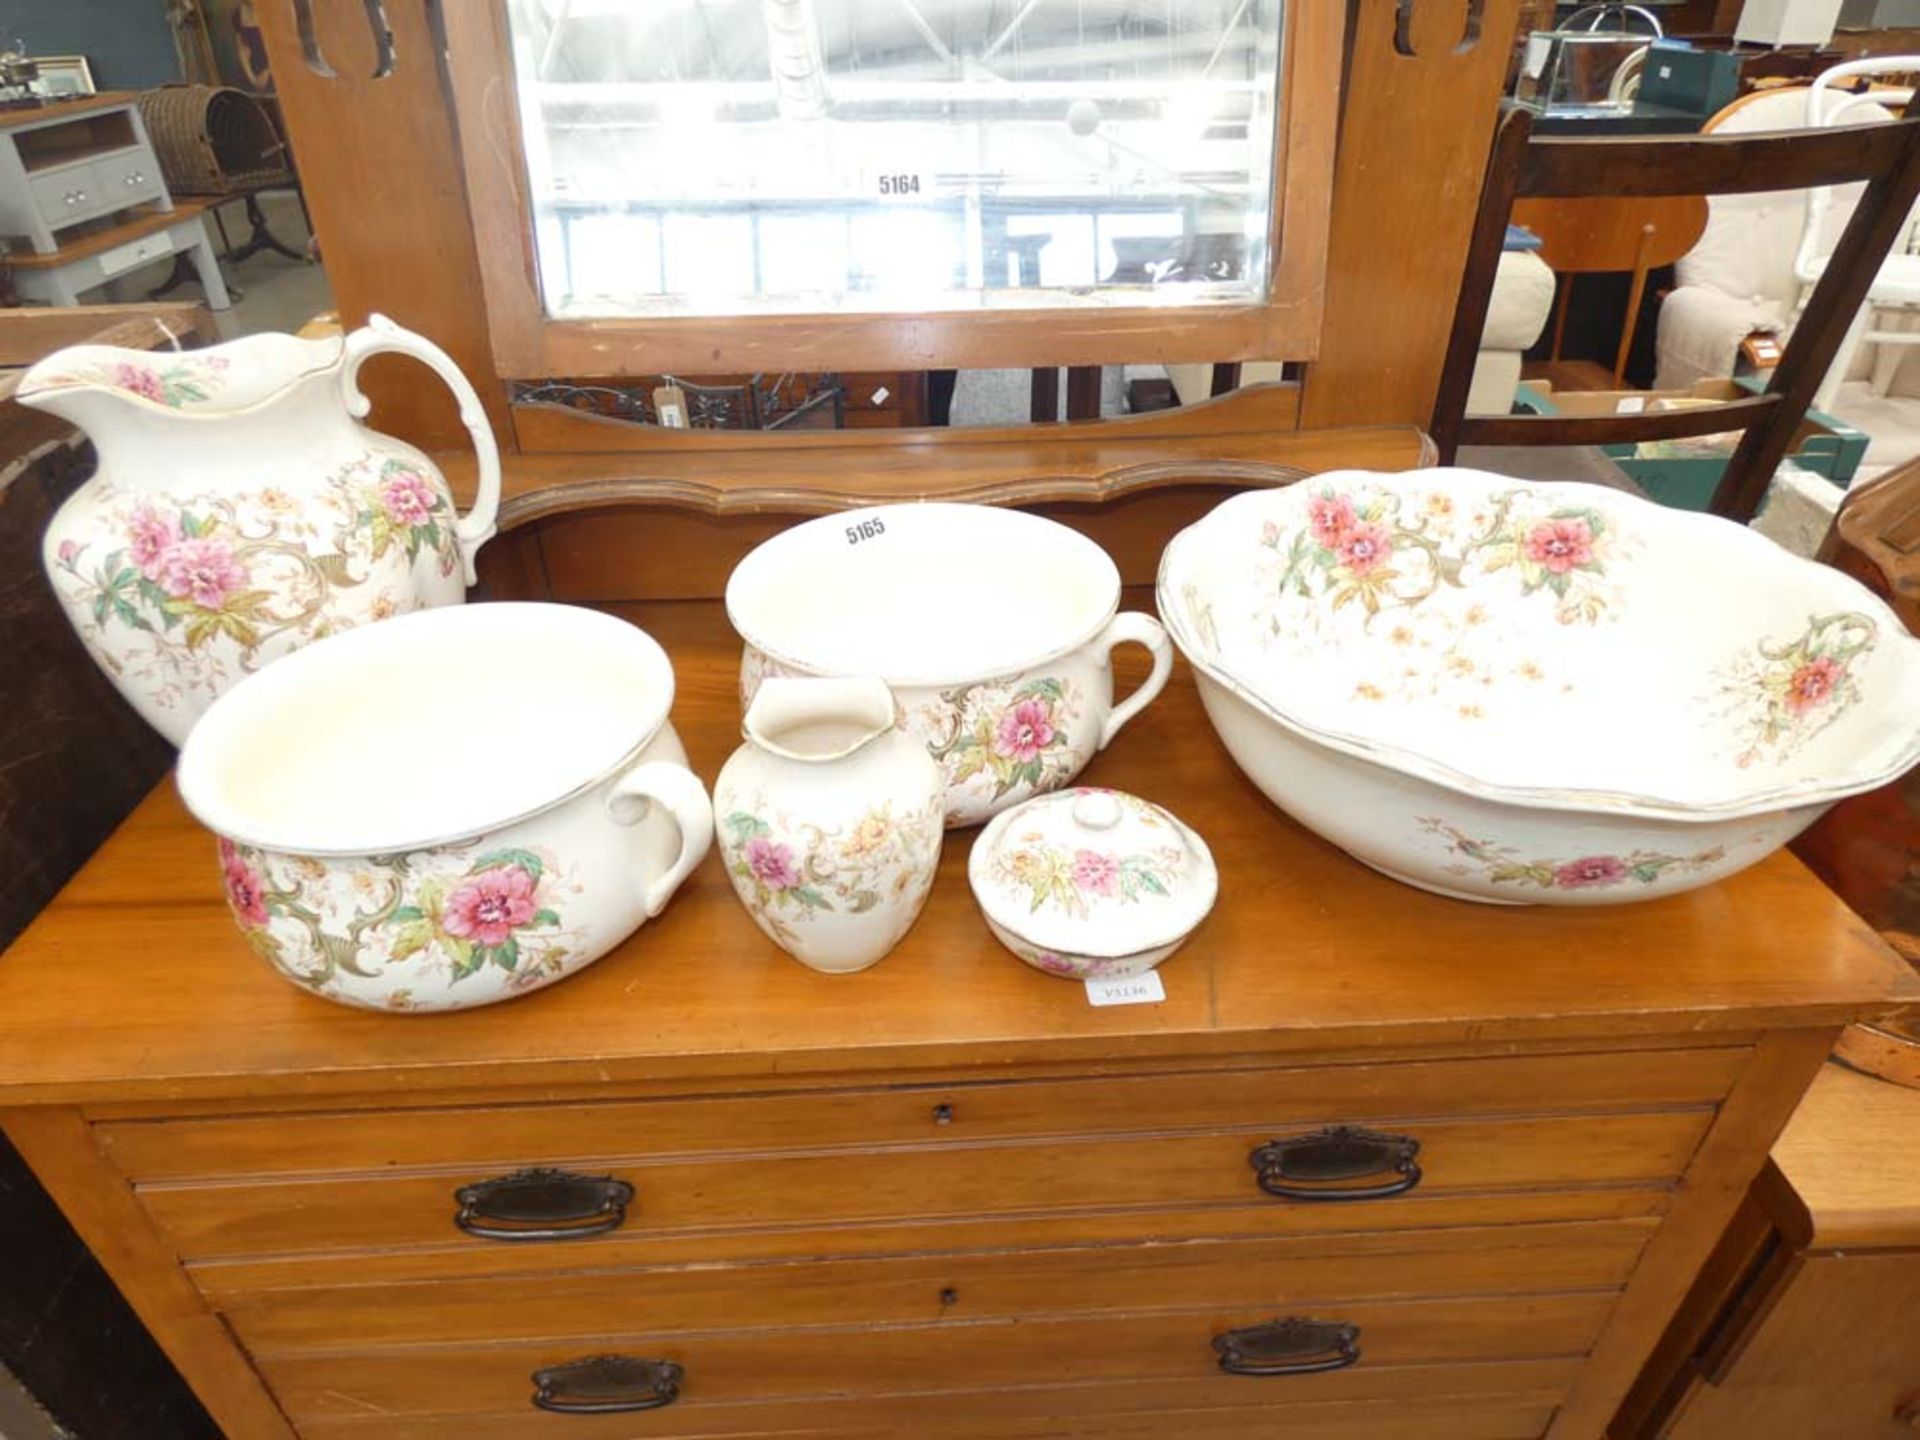 Floral patterned washstand, jug and bowl set plus two chamber pots